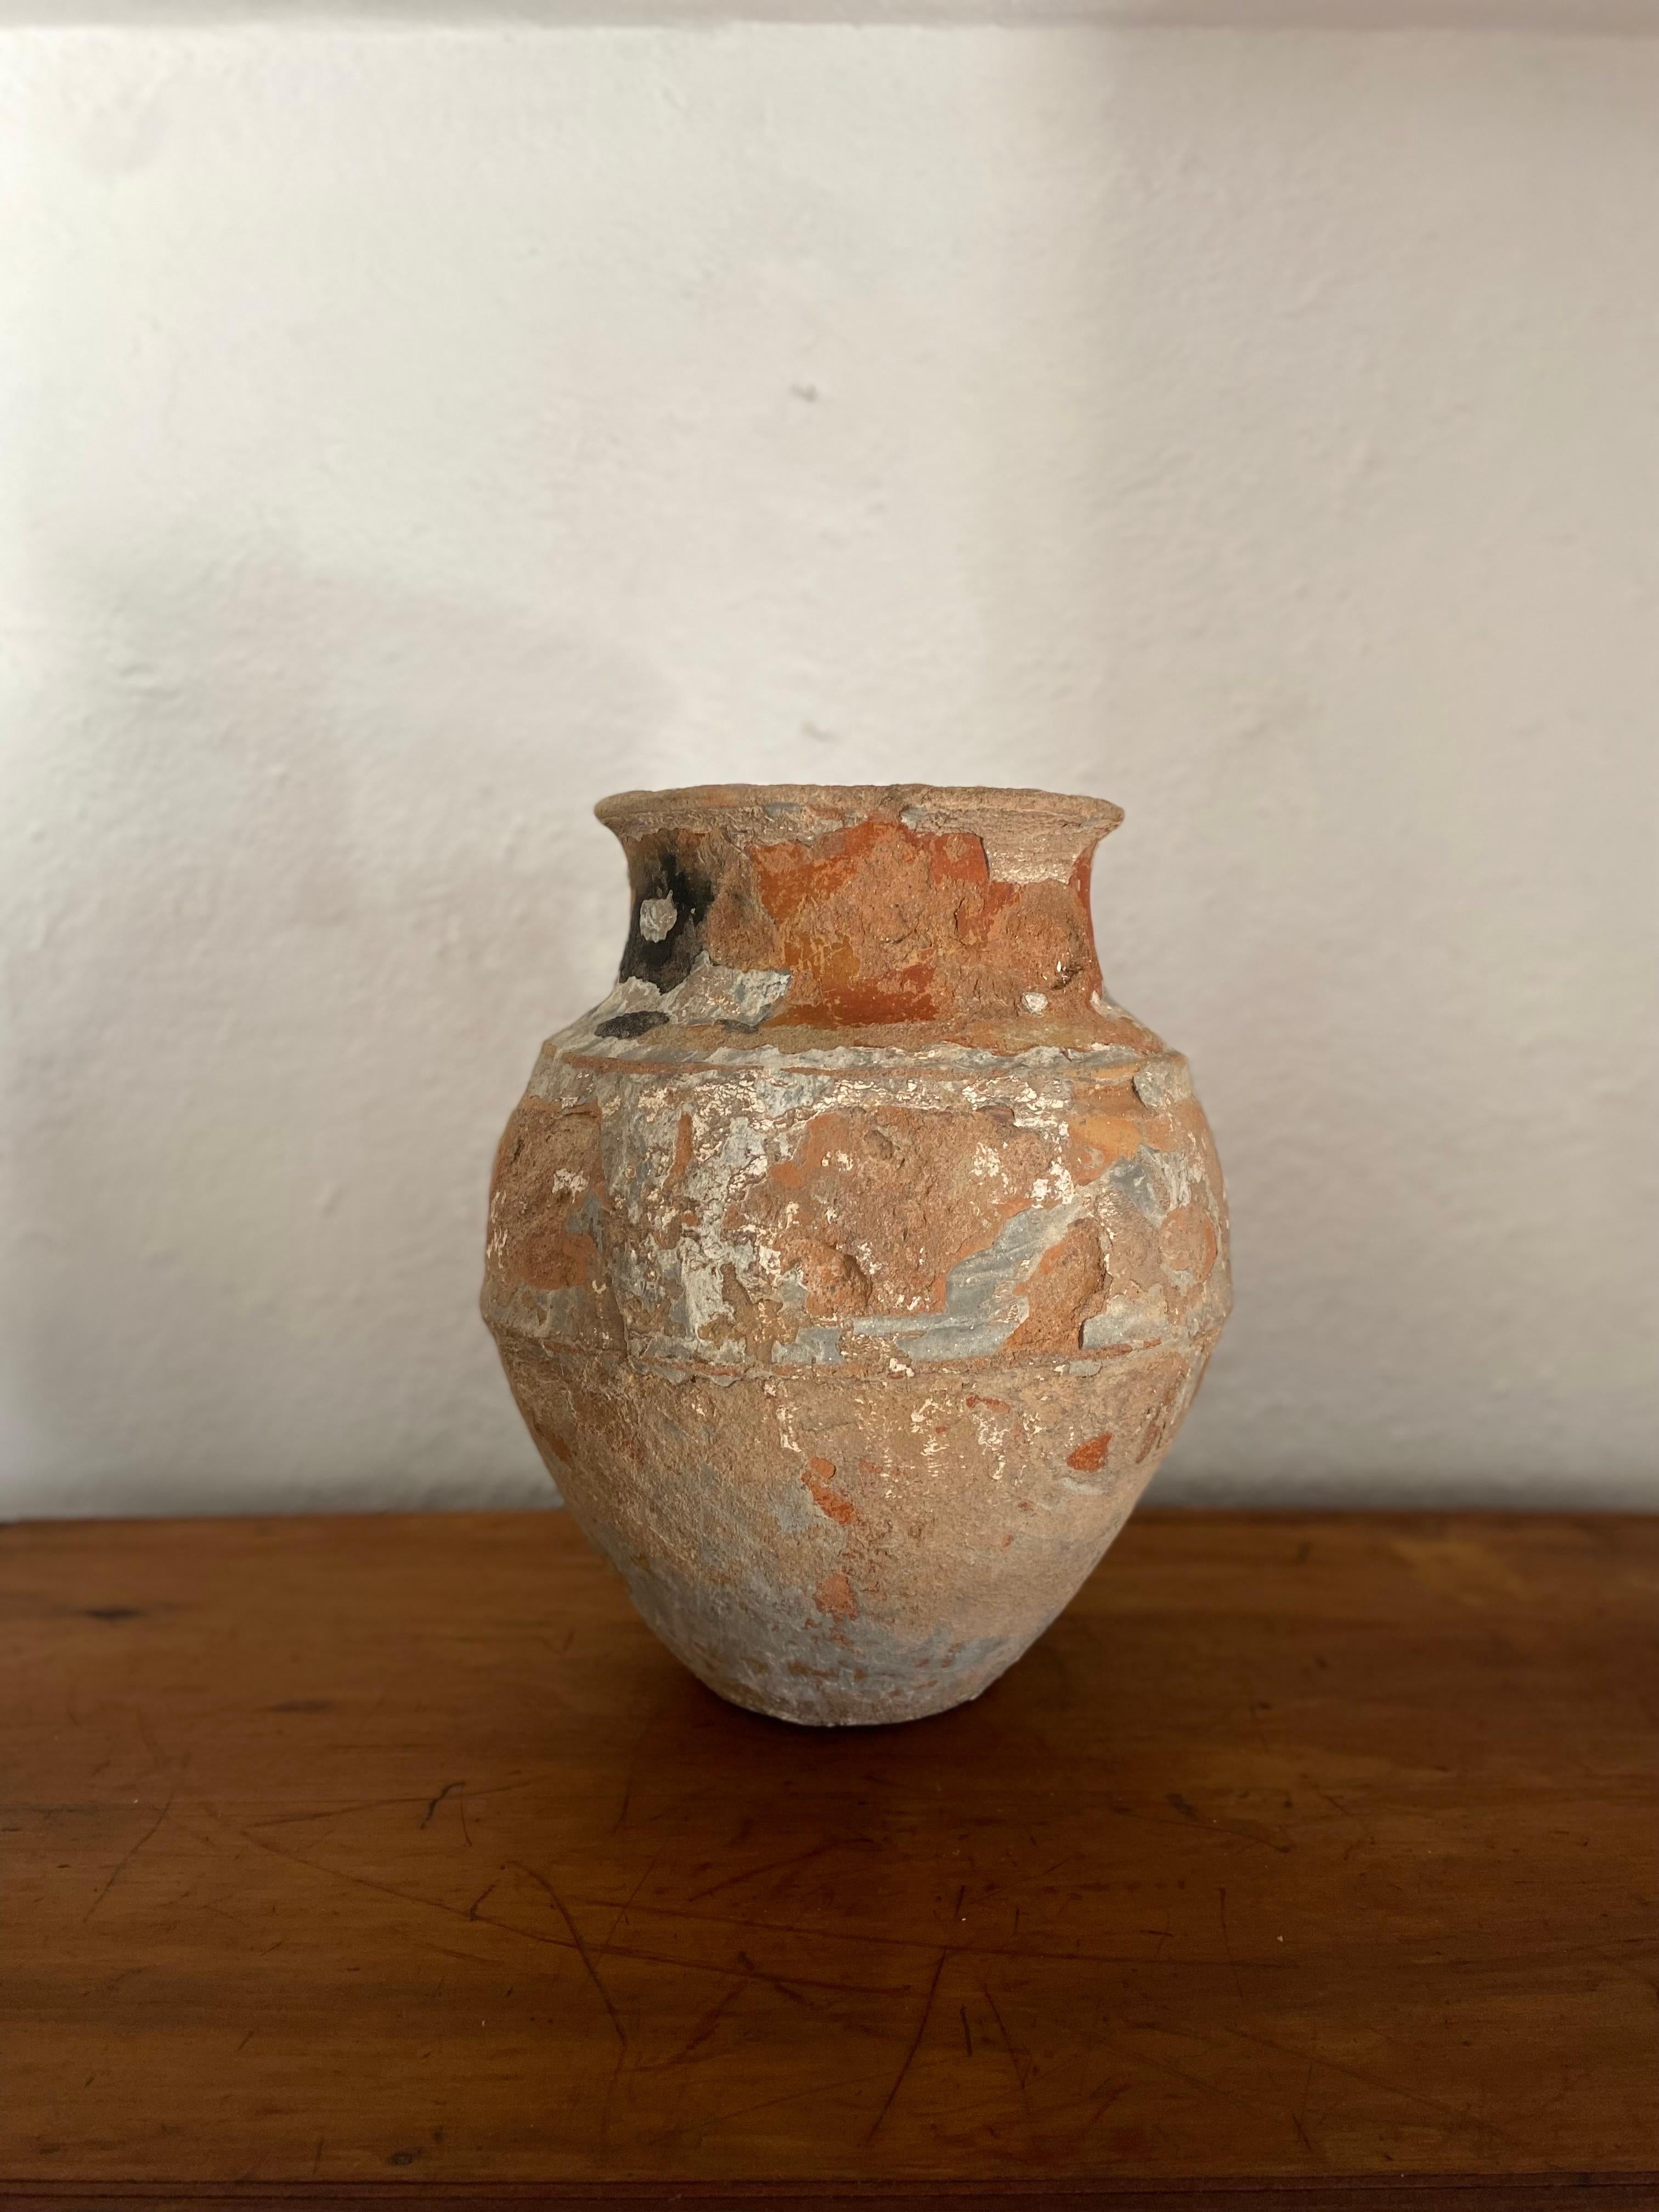 Ceramic Highly Distressed Water Jar From Central Yucatan, Circa Early 20th Century